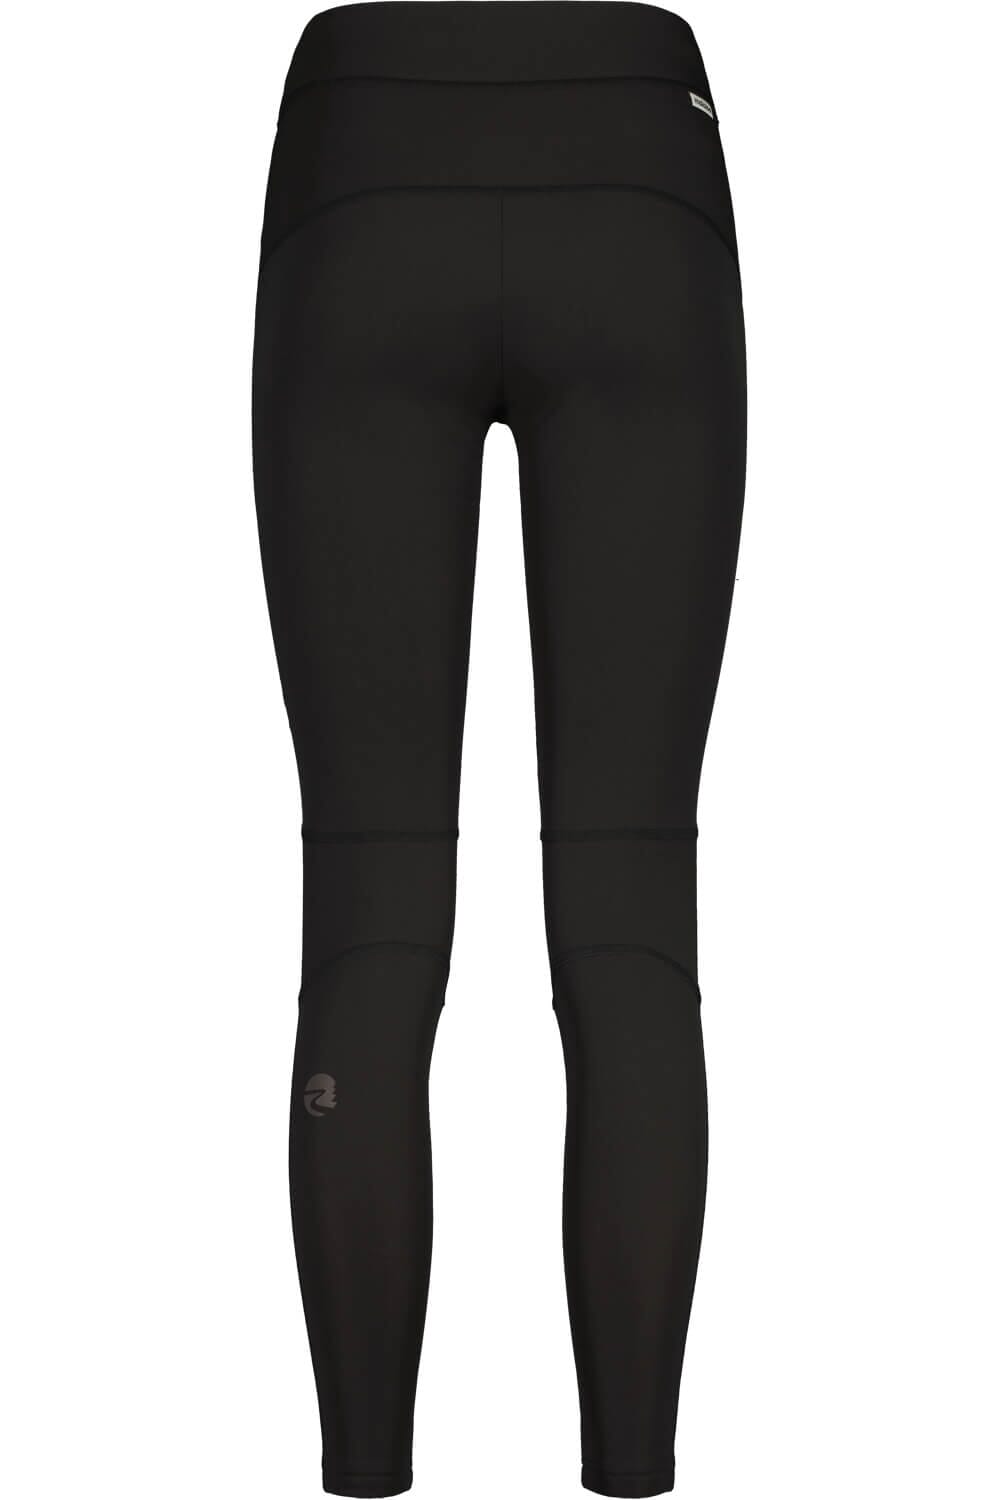 Maloja W's ForcolaM. Adventure Thermal Tights - Recycled Nylon & Recycled Spandex Moonless Pants